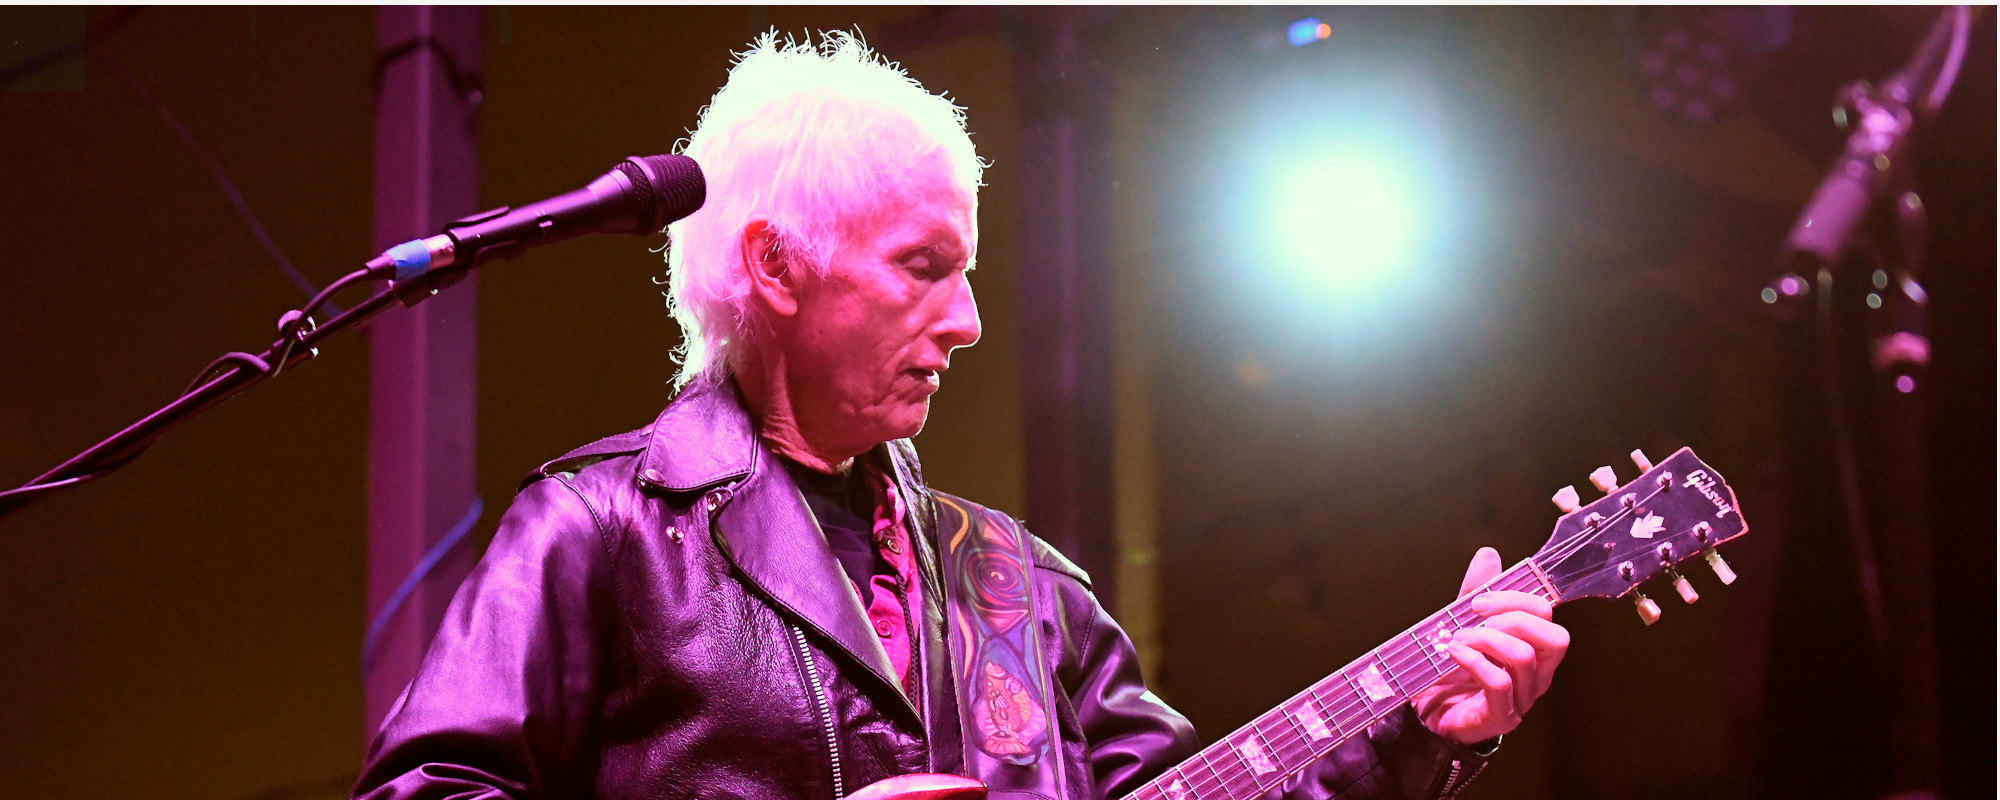 Robby Krieger, Talib Kweli, and More Unite at Give A Note + Artist For Artist During SXSW